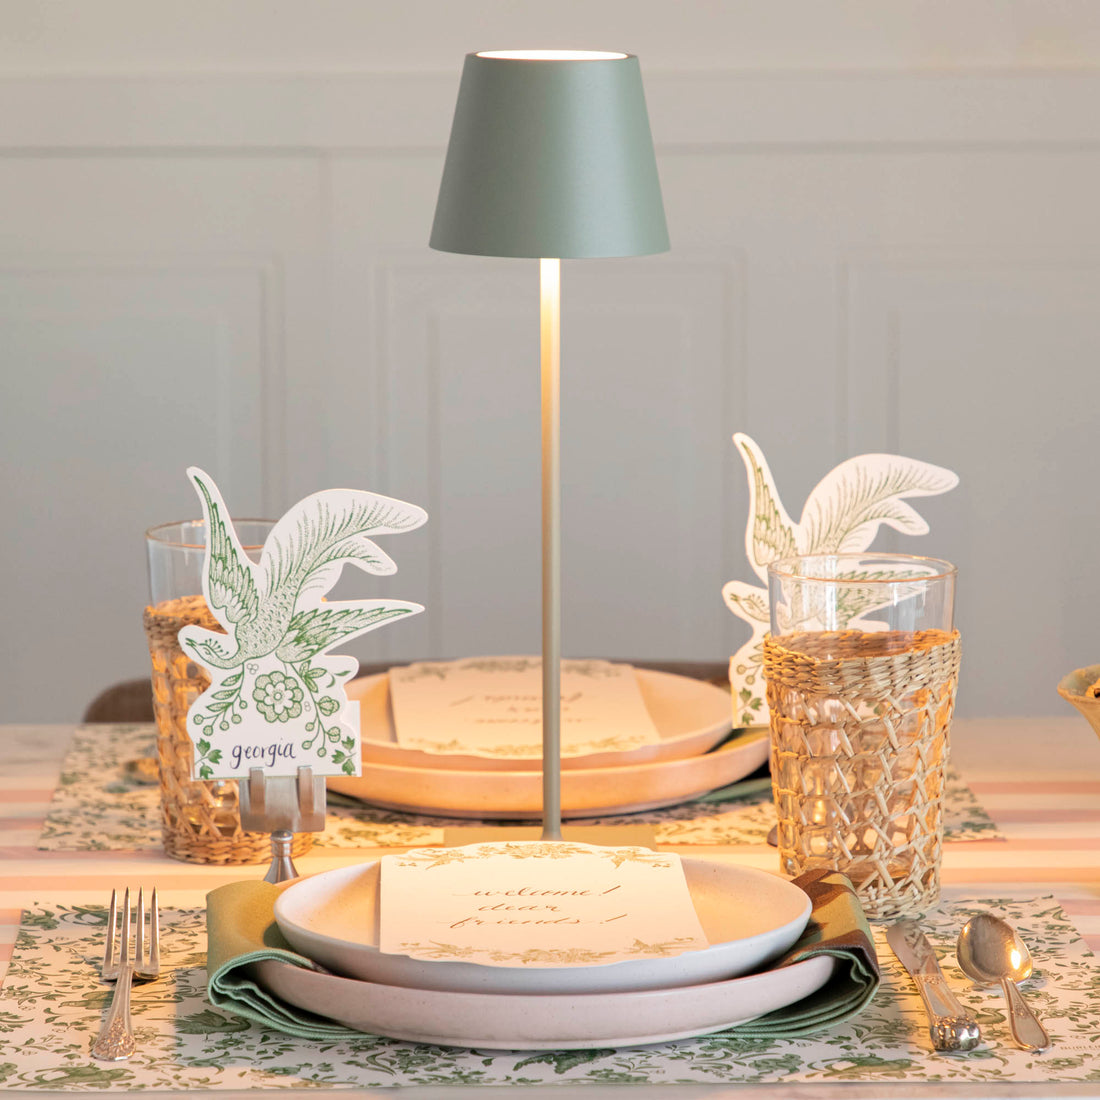 A table setting with place settings and a Zafferano Sage Cordless Lamp.